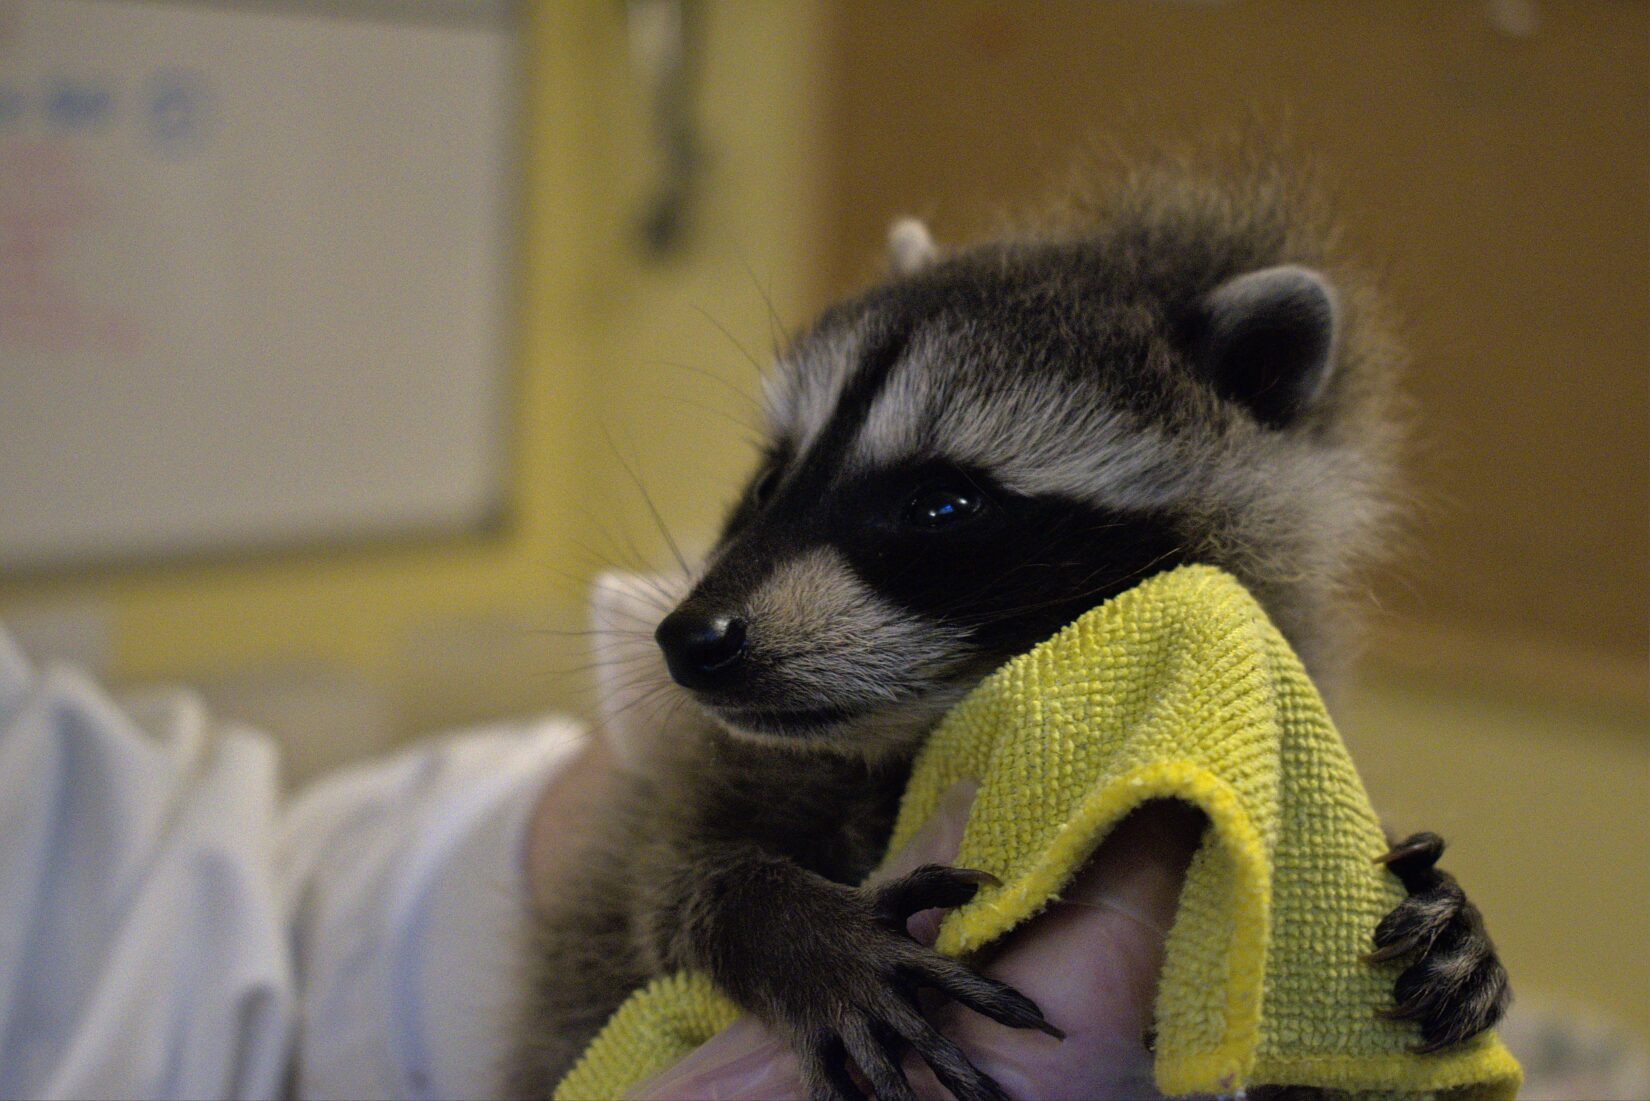 Baby raccoon resting their head on a yellow cloth while held in gloved hands at Wild ARC